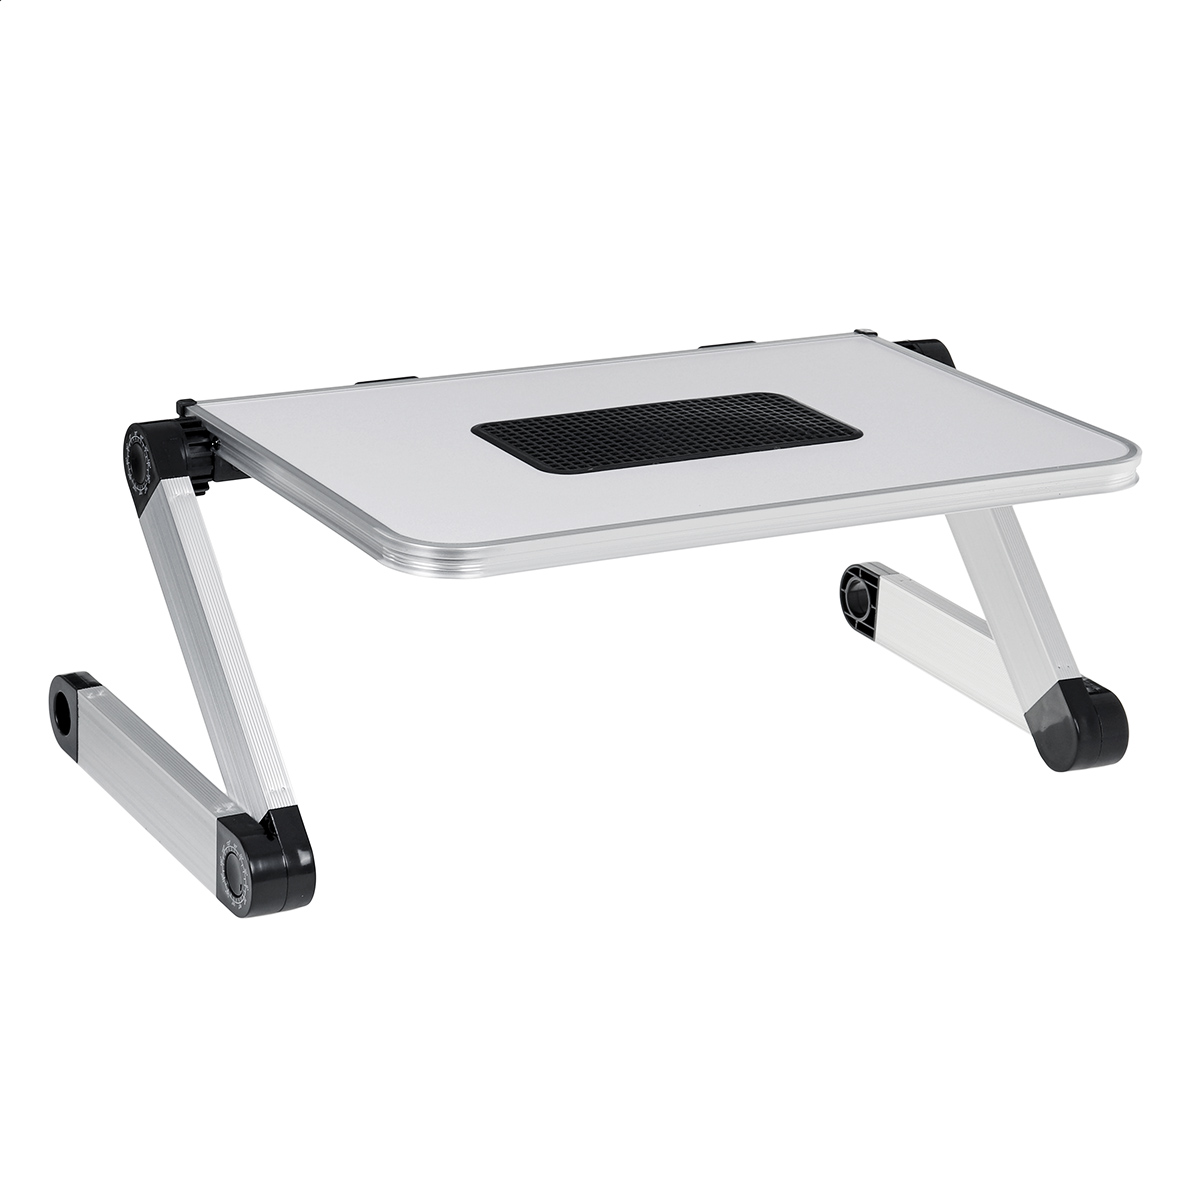 5026cm-Enlarge-Foldable-with-Cooling-Fan-Hole-Aluminum-Laptop-Computer-Desk-Table-TV-Bed-Computer-Ma-1700717-9